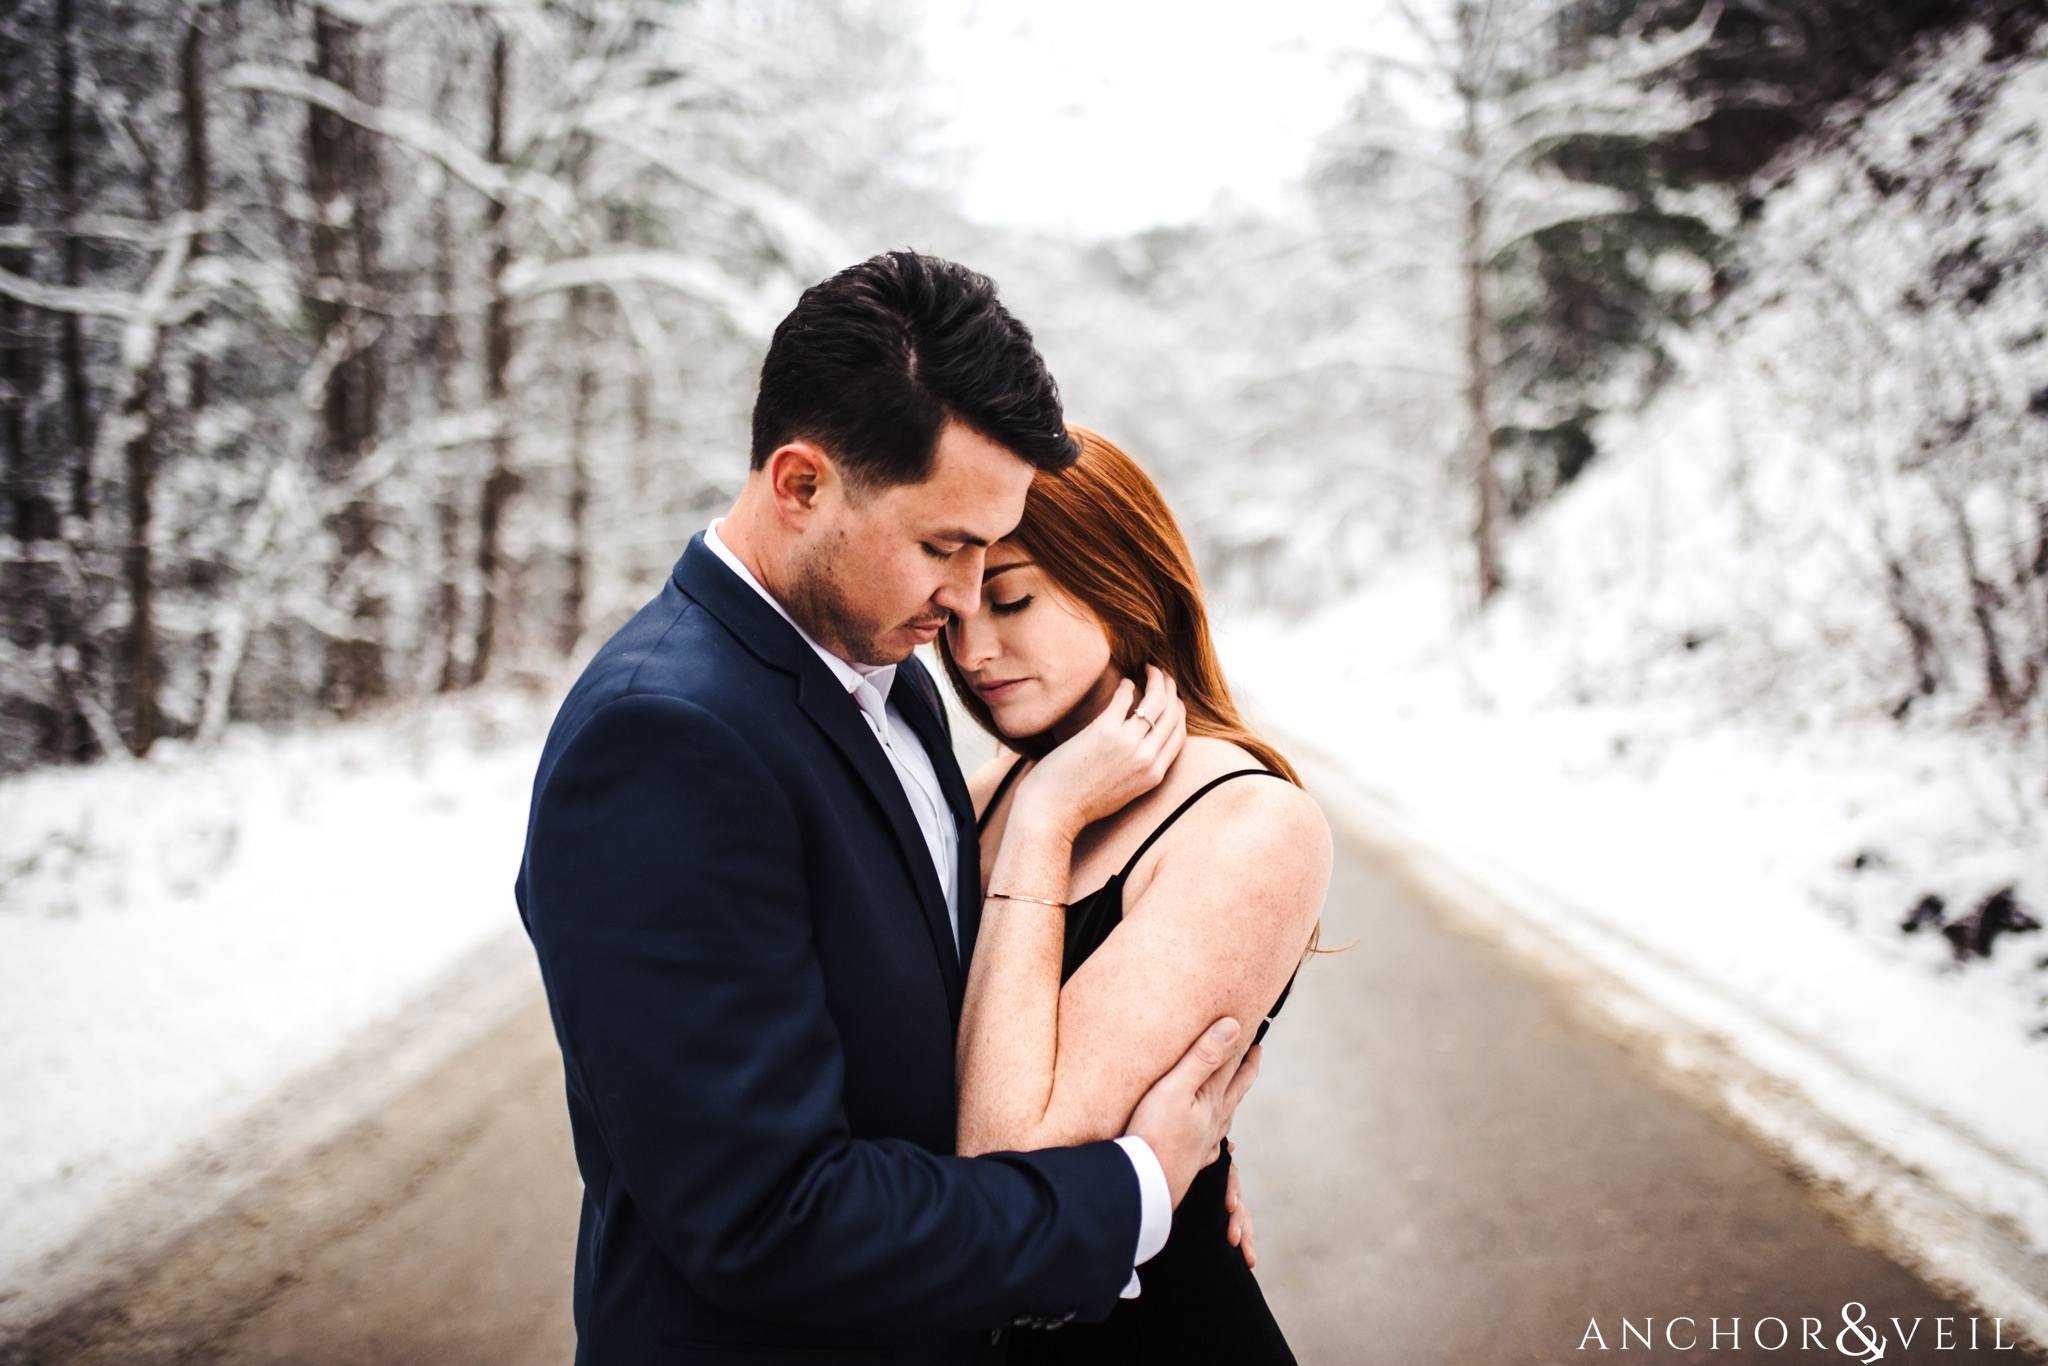 holding her tight on the road during their Snowy Asheville Engagement Session